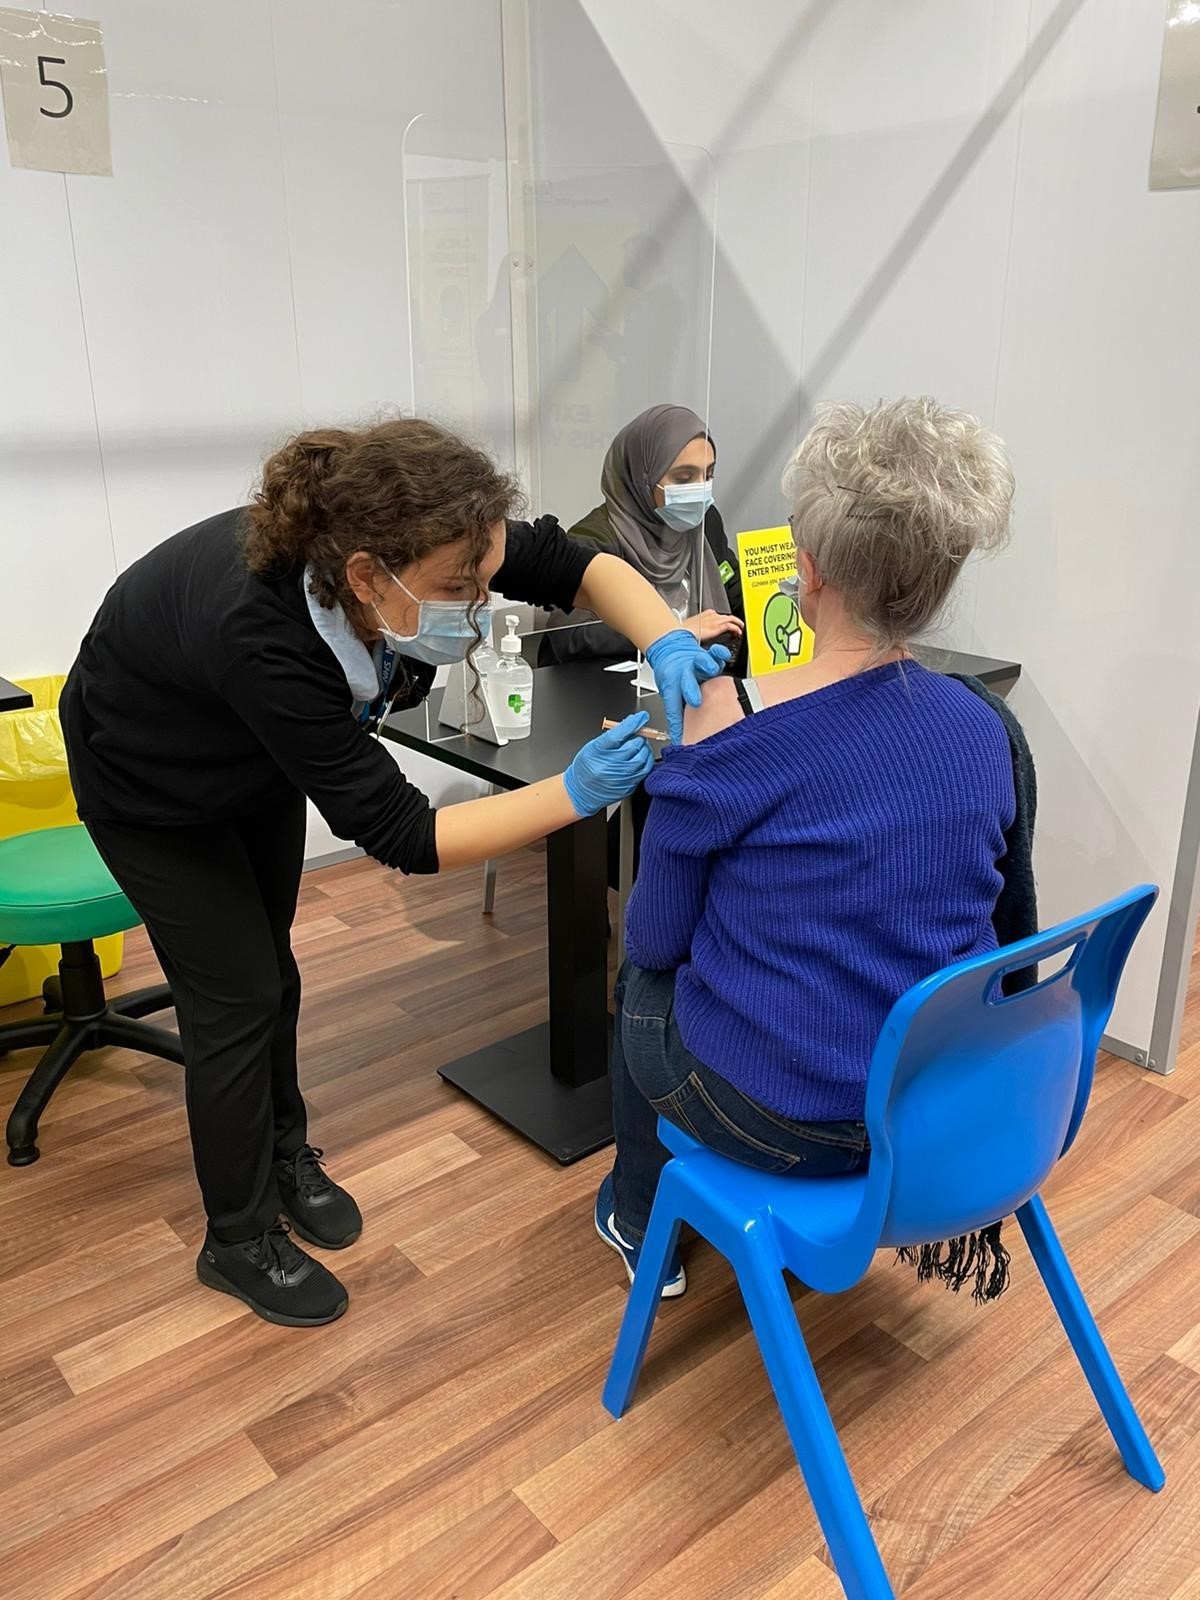 Another patient receives the Covid jab from a trained member of Asdas pharmacy team. Credit: Asda